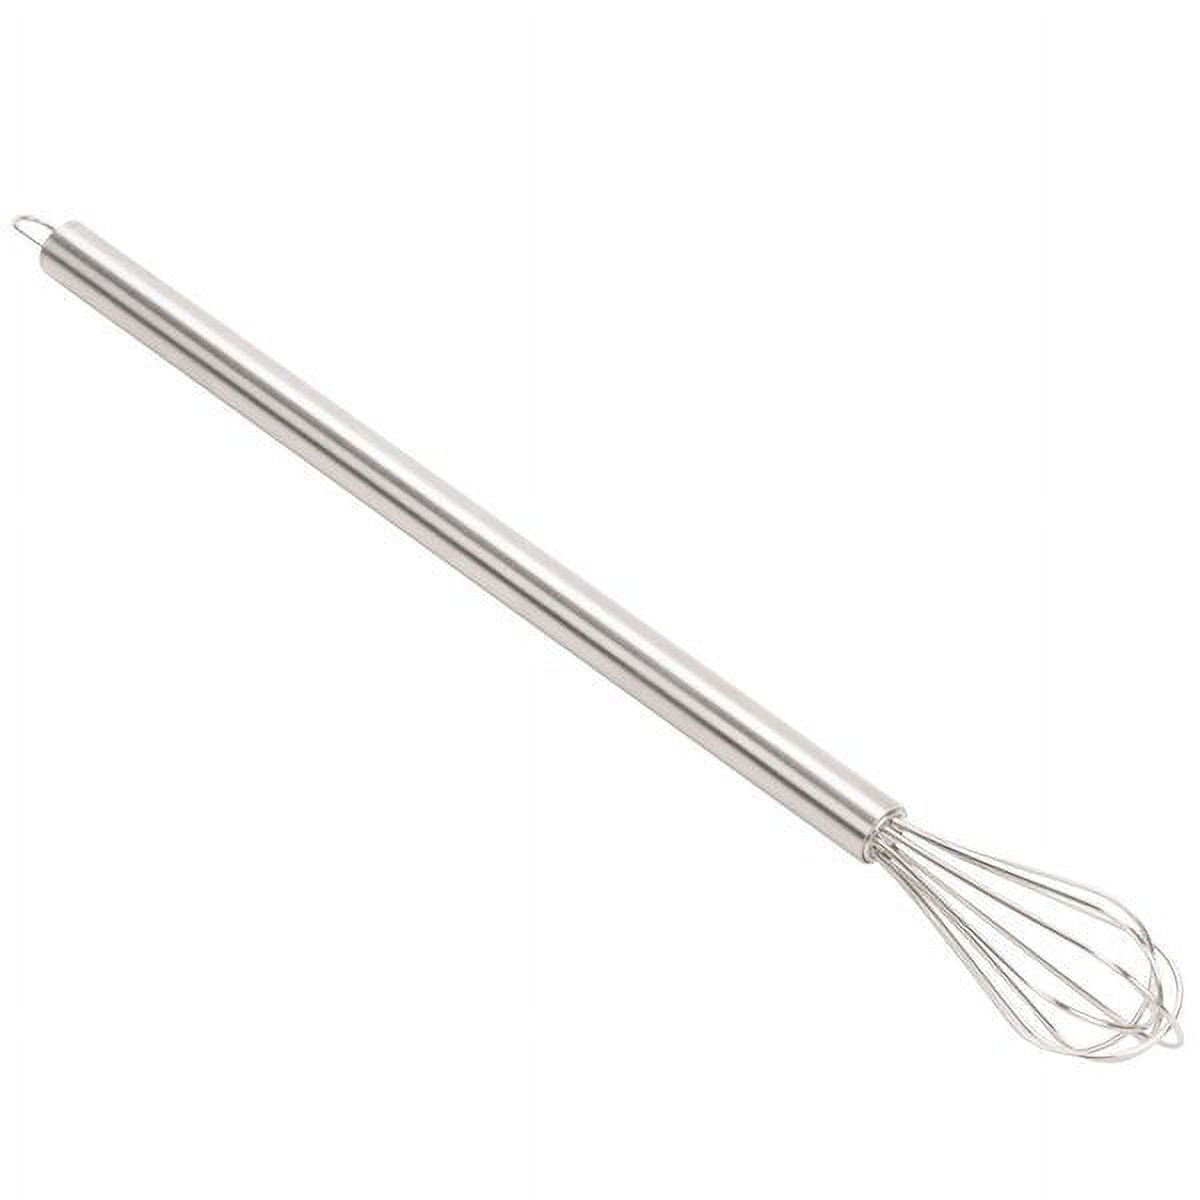 American Metalcraft SBW7 Utensil, Stainless Steel, Square Bar Whisk, 7 L